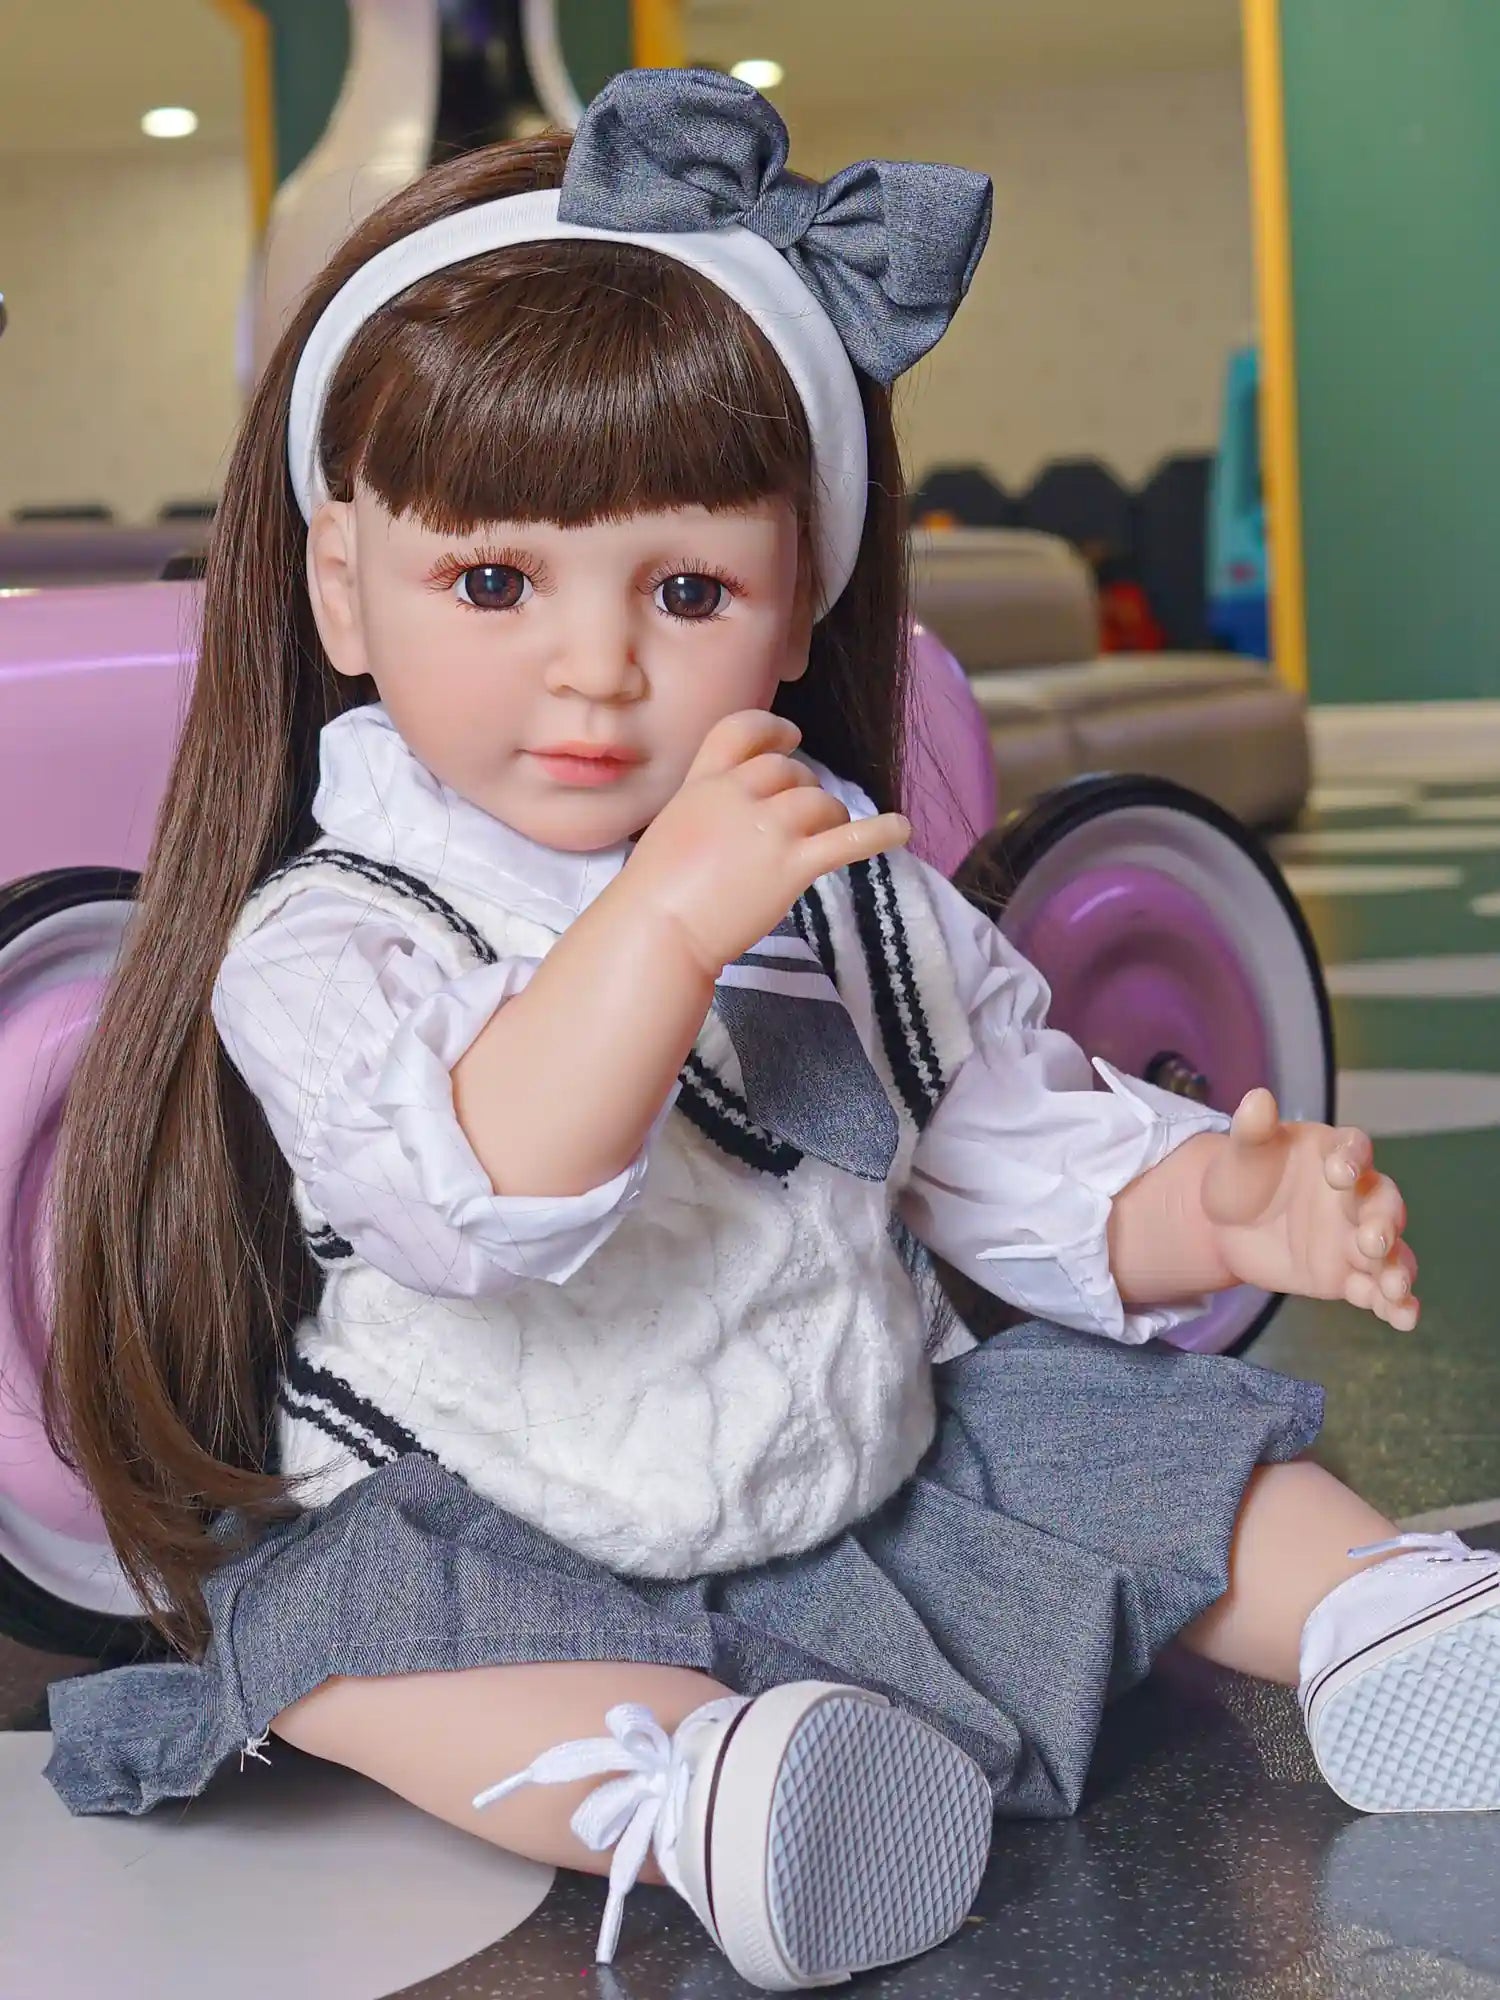 A hyper-realistic doll with long, straight brown hair and brown eyes, sitting with one hand up, wearing a grey and white school uniform, complete with a grey bow headband.